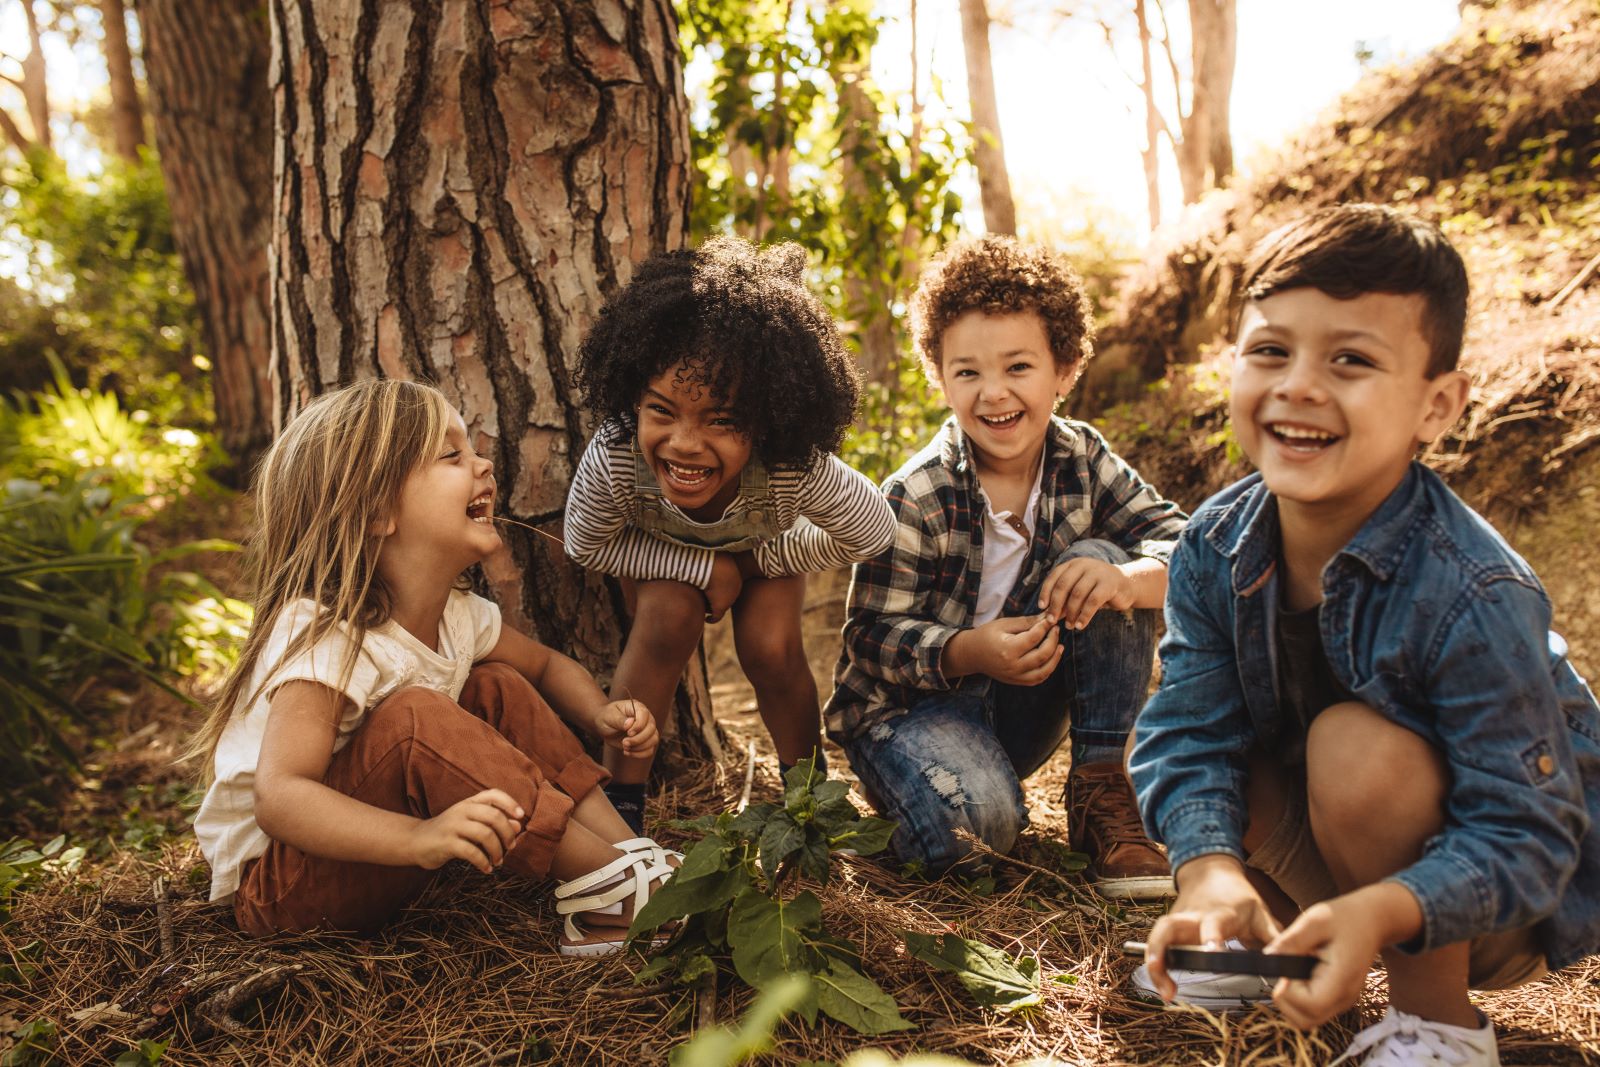 Image credit: Shutterstock / Jacob Lund <p>Playtime is a social classroom for children. Through games and shared activities, kids learn vital interpersonal skills like sharing, negotiating, and empathy.</p>